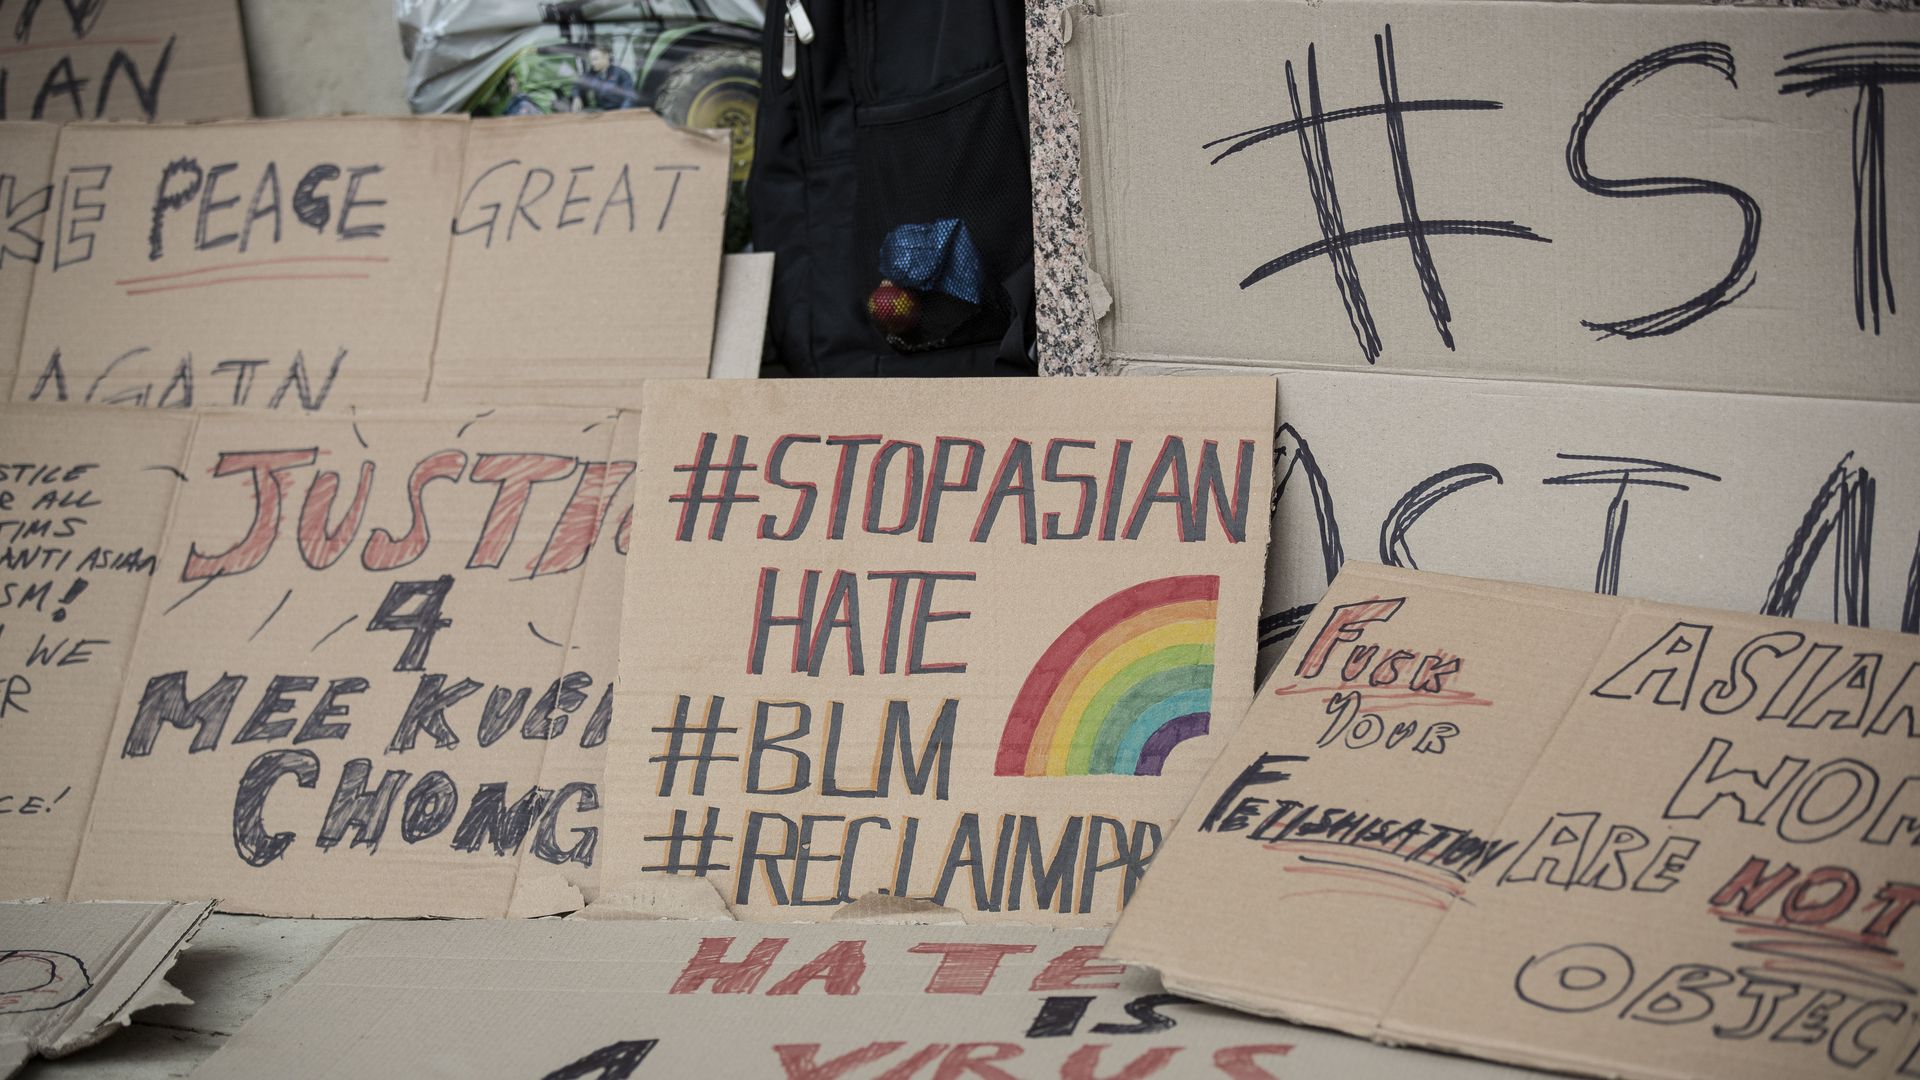 Signs from a protest with slogans like "BLM" and "Stop asian hate"